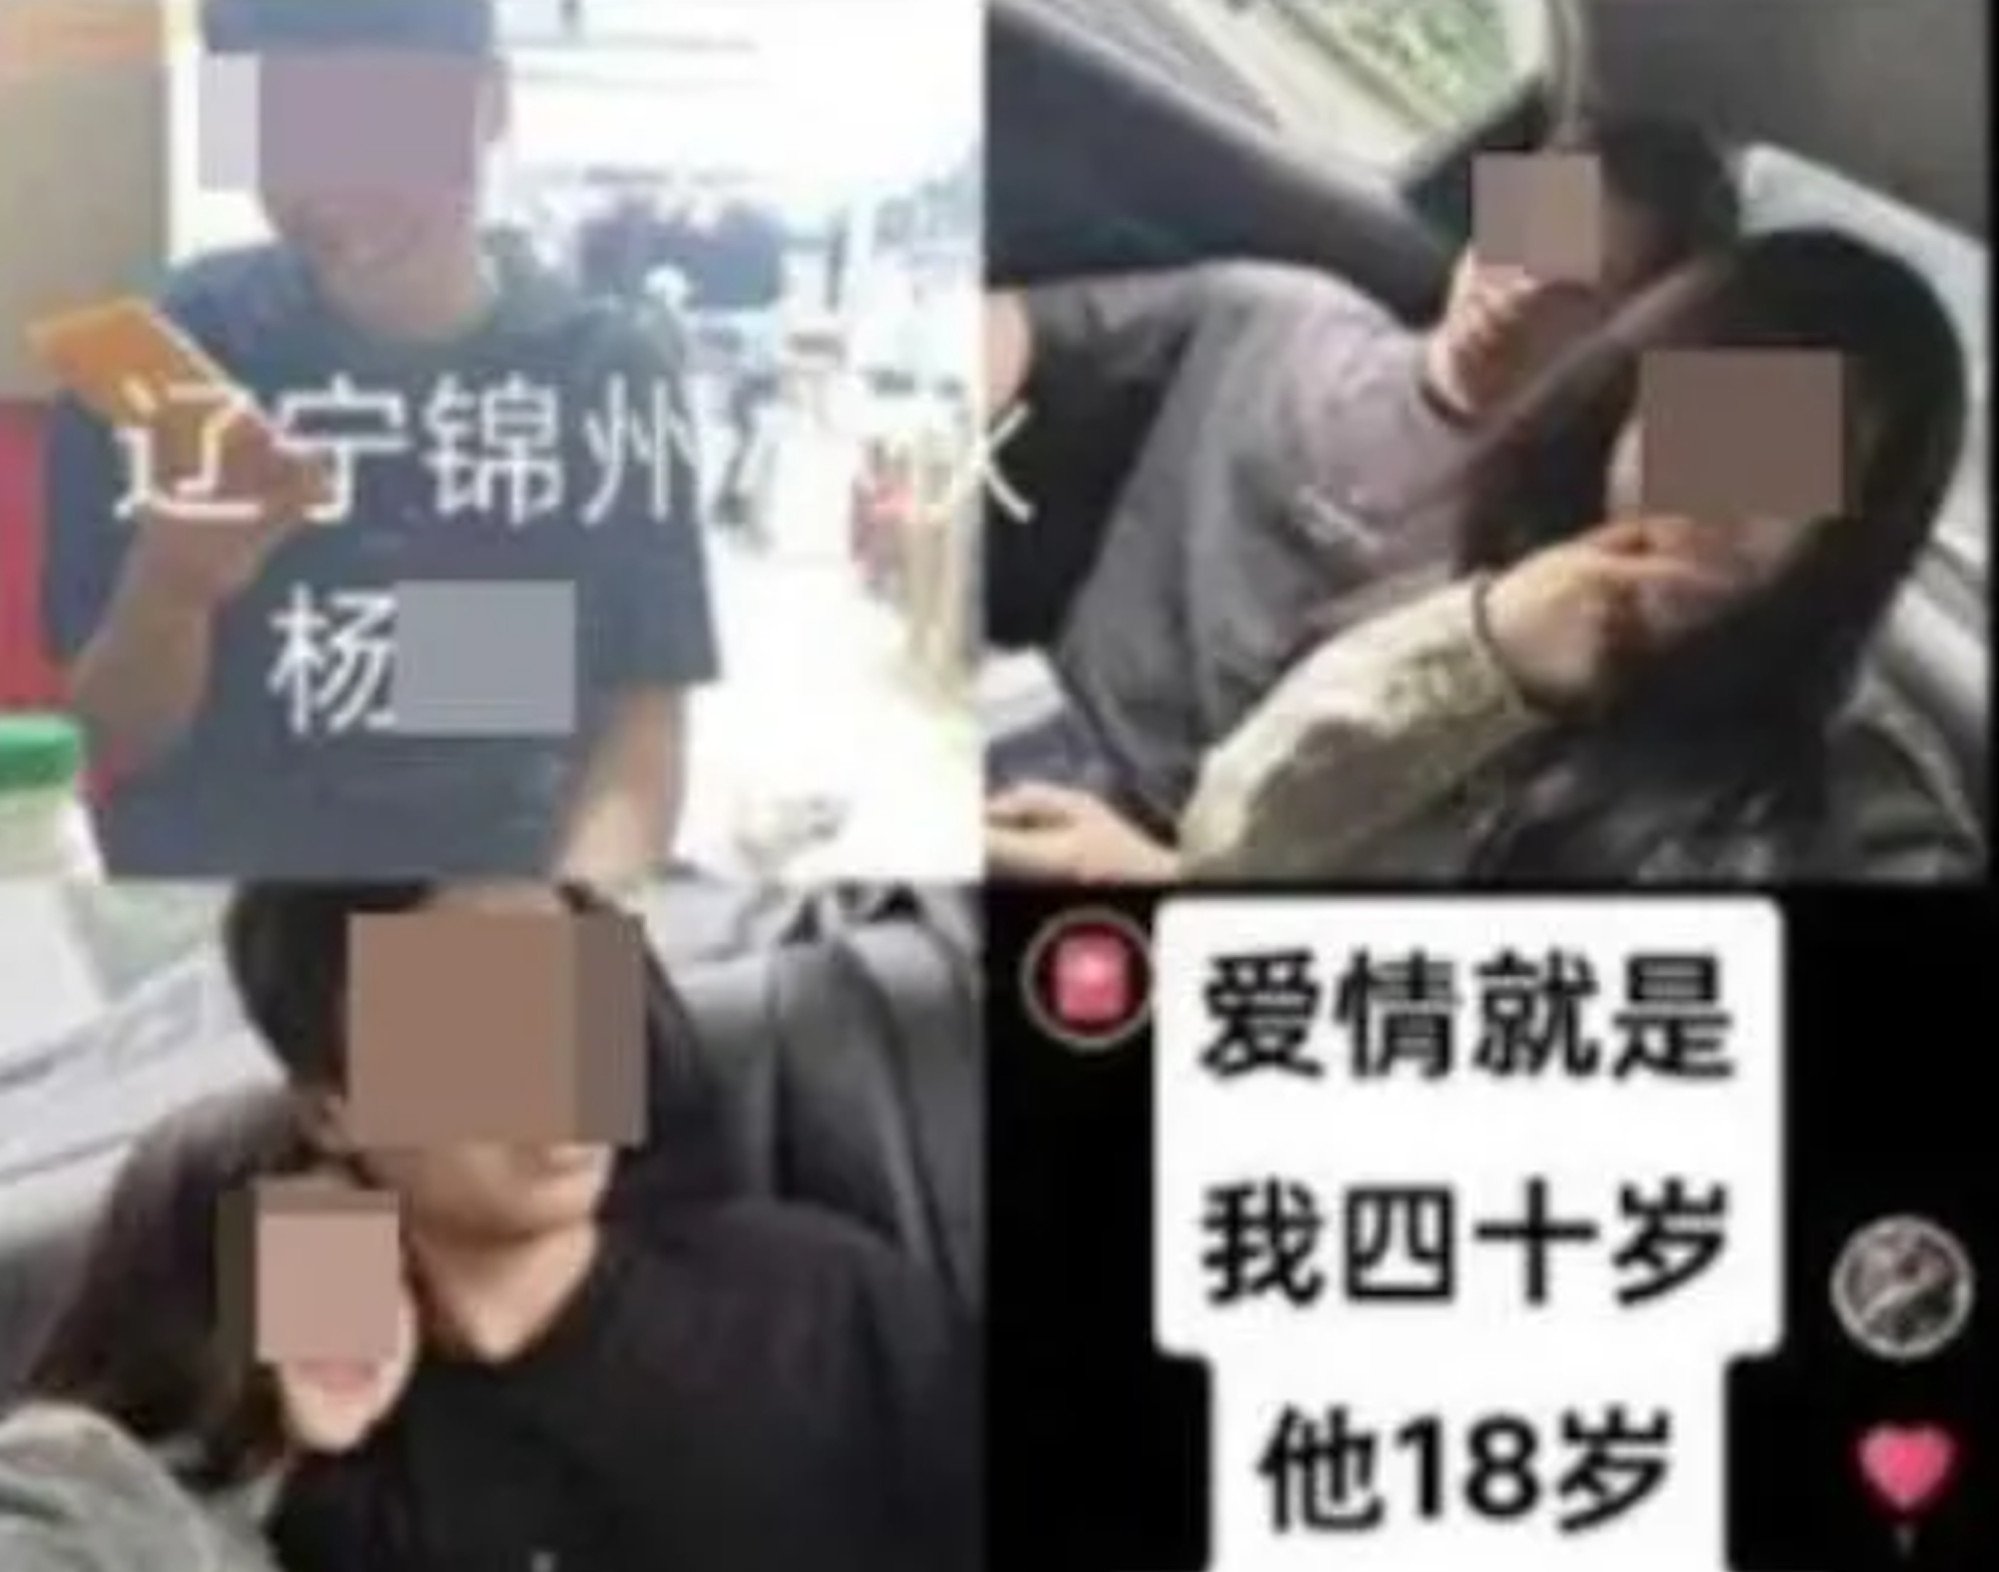 An array of images of the couple appeared online prior to their split and the woman’s nude stunt. Photo: Weibo